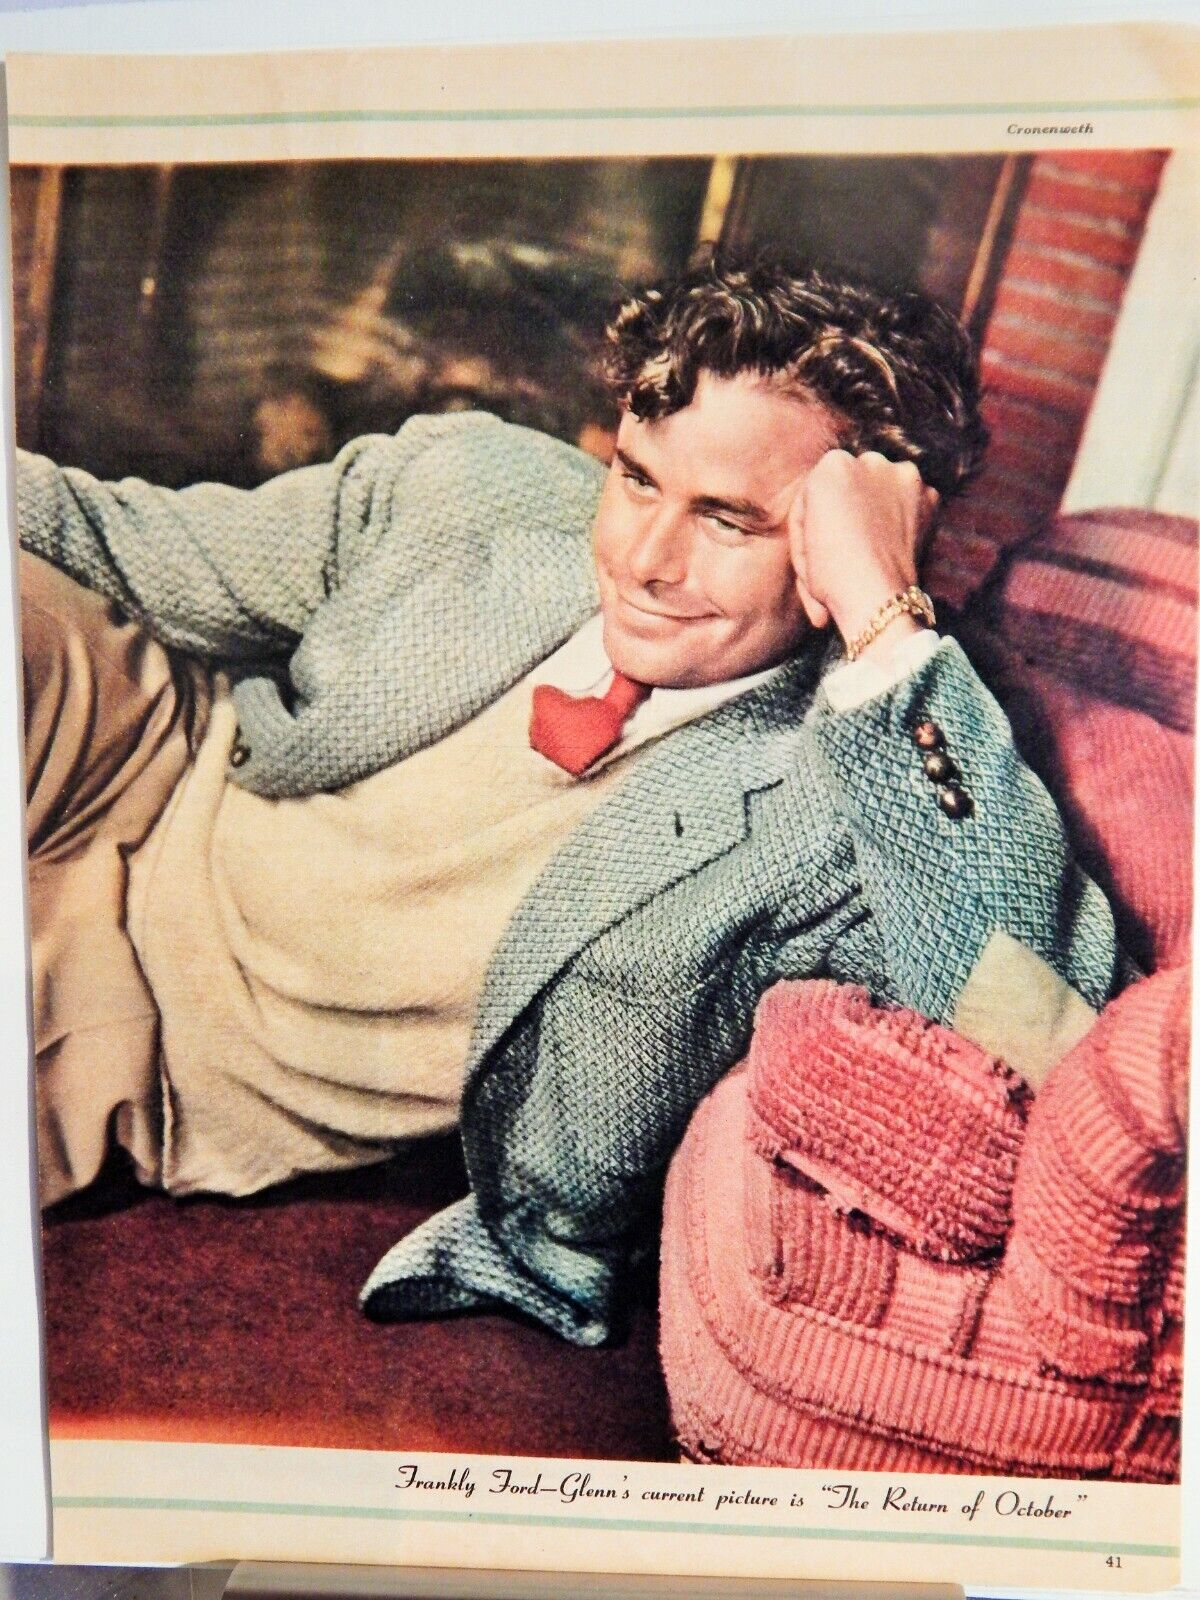 GLENN FORD COLOR PUBLICITY Photo Poster painting / JAMES STEWART Photo Poster painting ORIGINAL VTG 1949